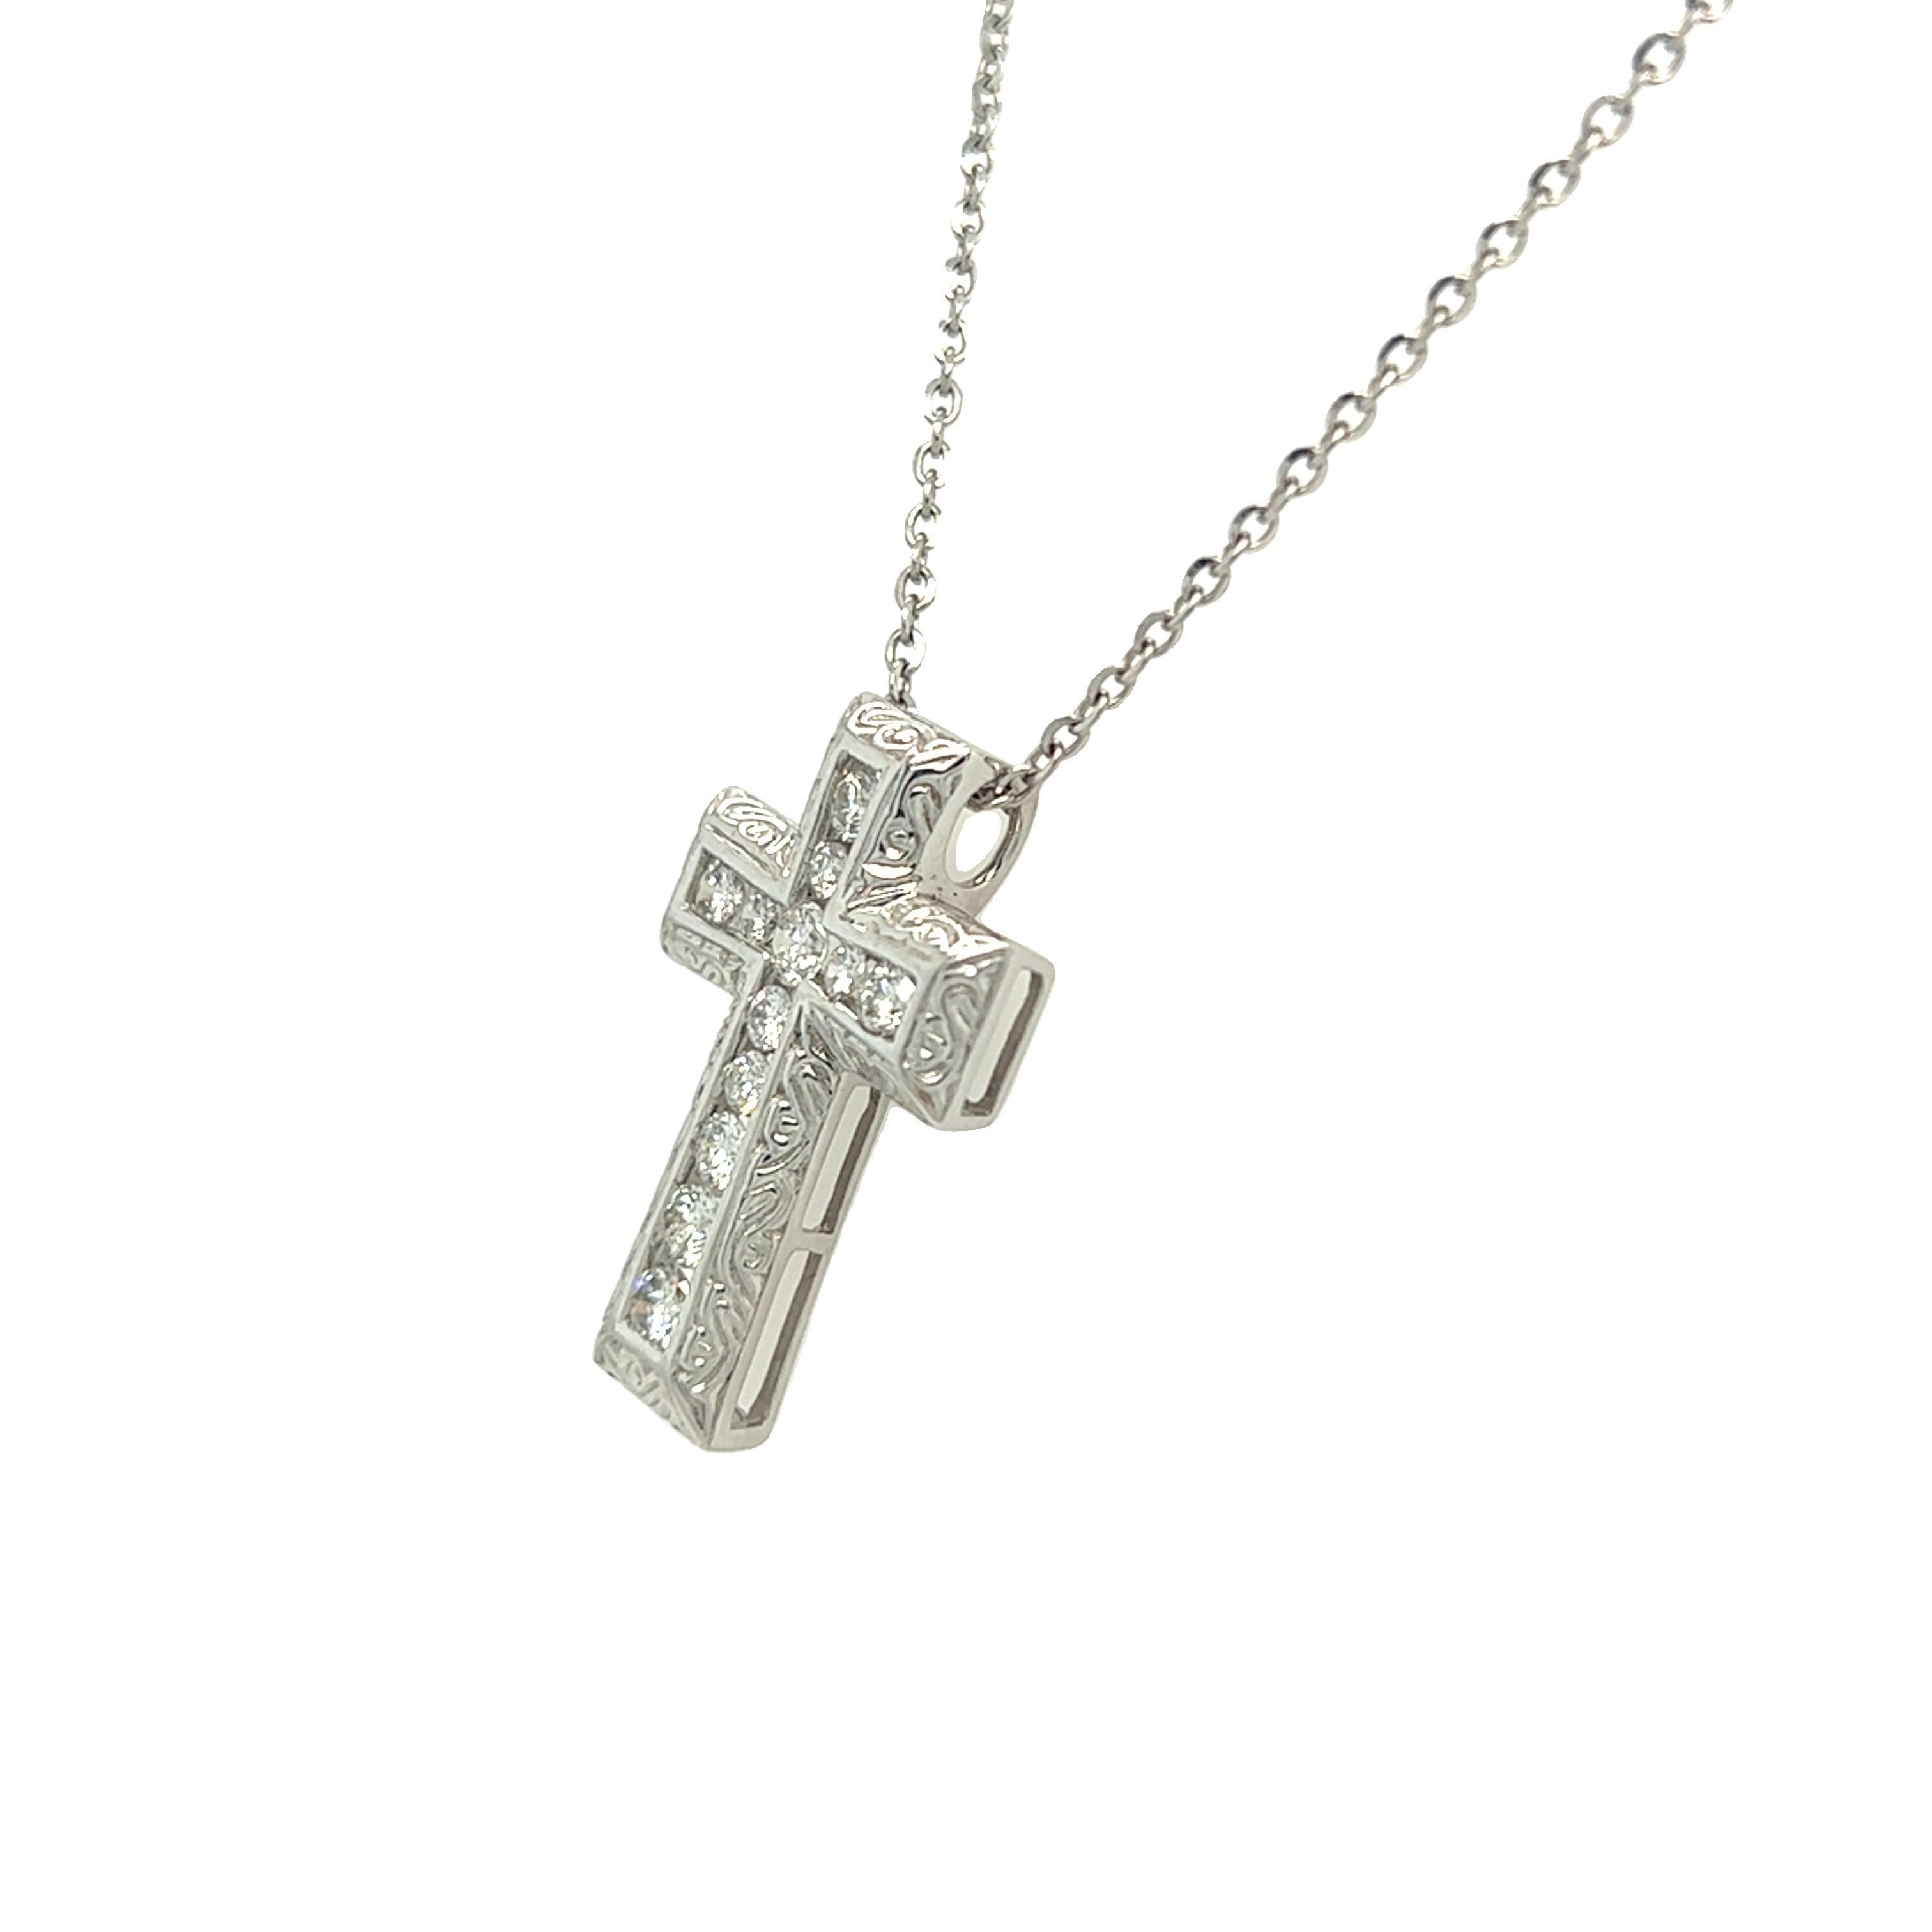 From our estate collection, this beautiful diamond cross pendant is made of 14K white gold. The diamonds in the center row are set in a channel for a smooth and clean look. It has a substantial presence and features 0.69 carat of diamonds in an